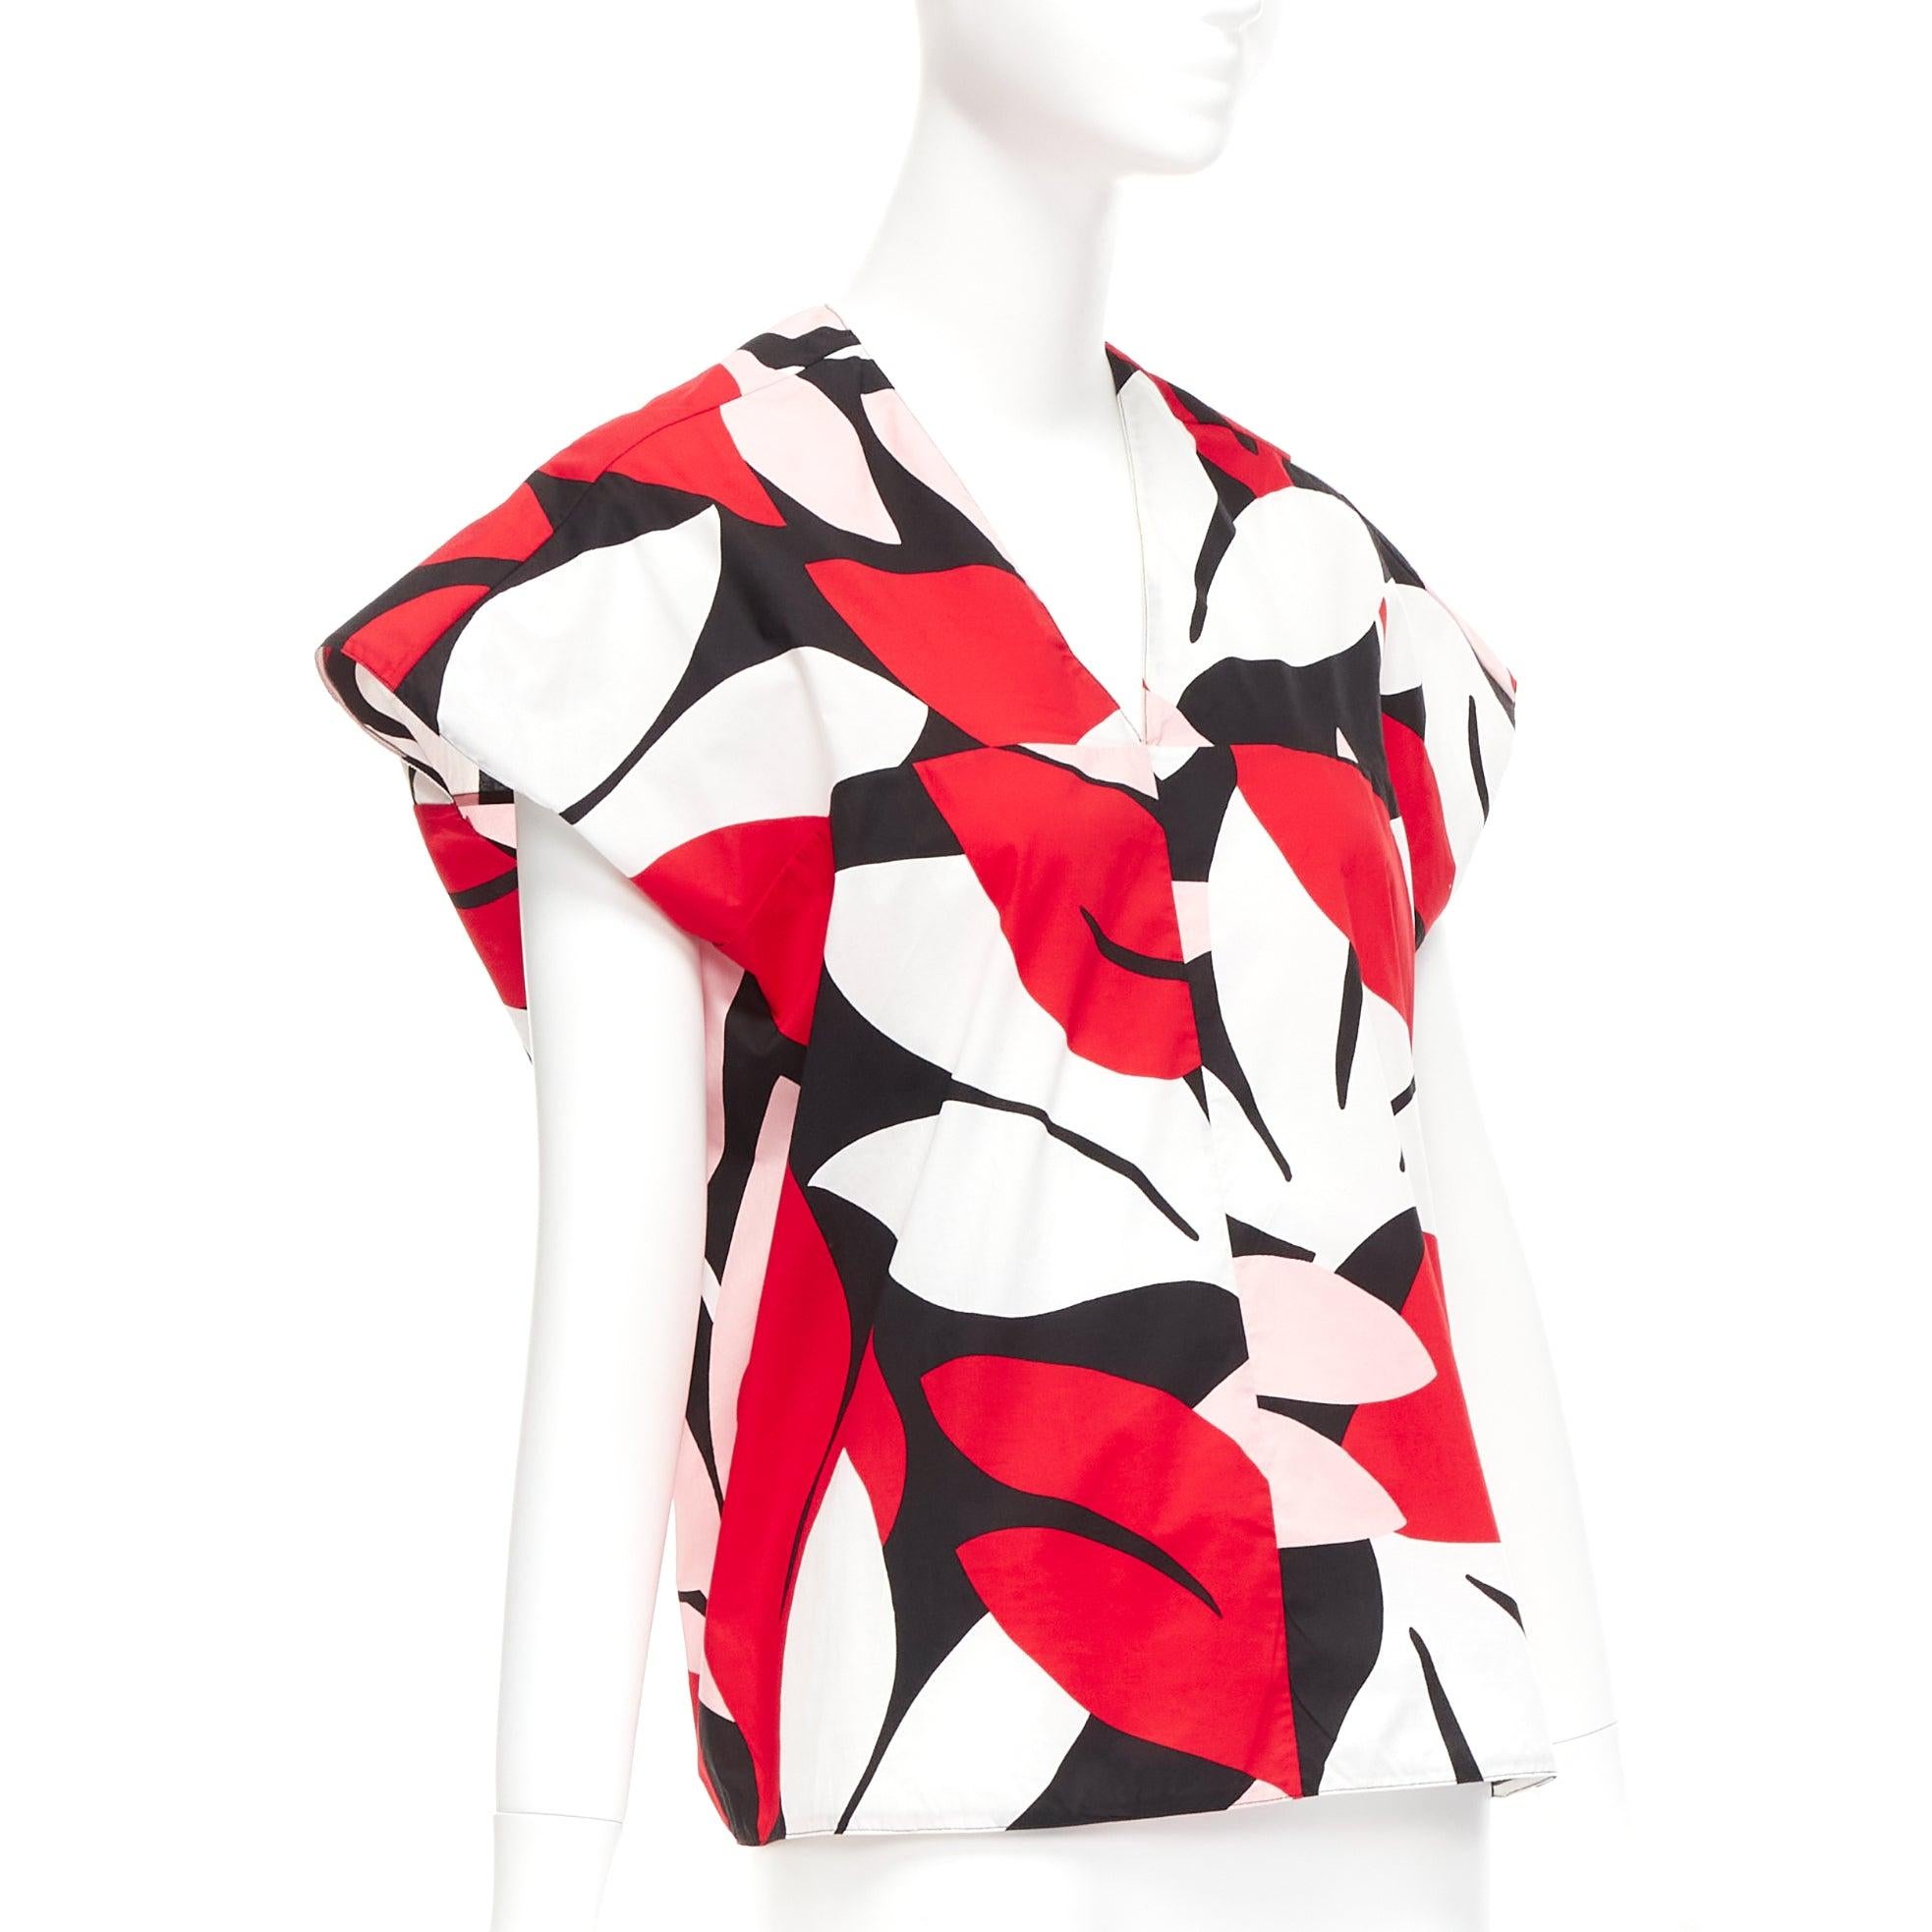 MARNI red black white 100% cotton geometric print cap sleeve boxy top IT38 XS
Reference: CELG/A00320
Brand: Marni
Material: Cotton
Color: Black, Red
Pattern: Geometric
Closure: Slip On
Extra Details: V neck. Angular cut armholes.
Made in: